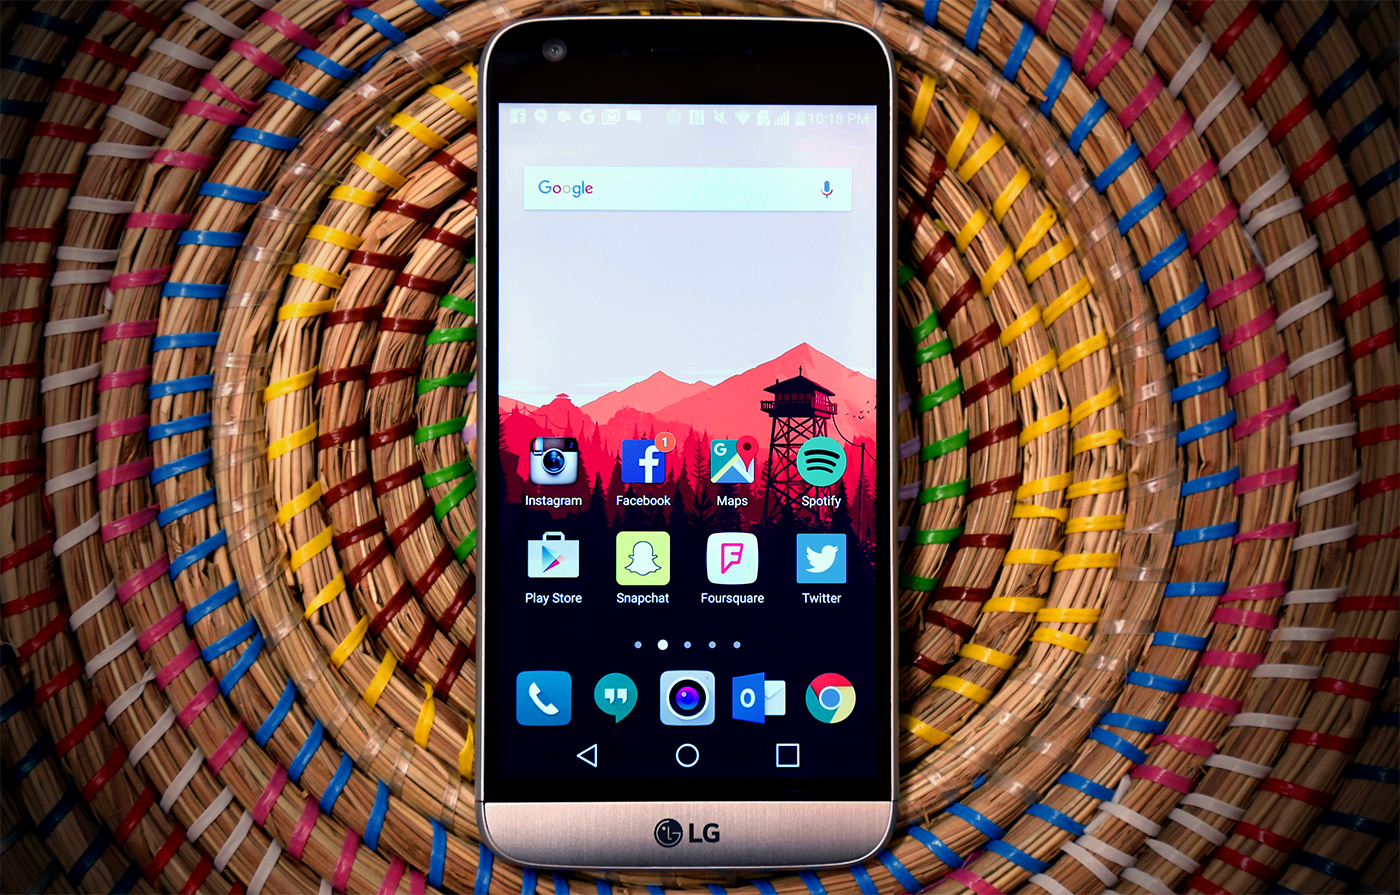 Mini review video: Our verdict on the LG G5 in about a minute